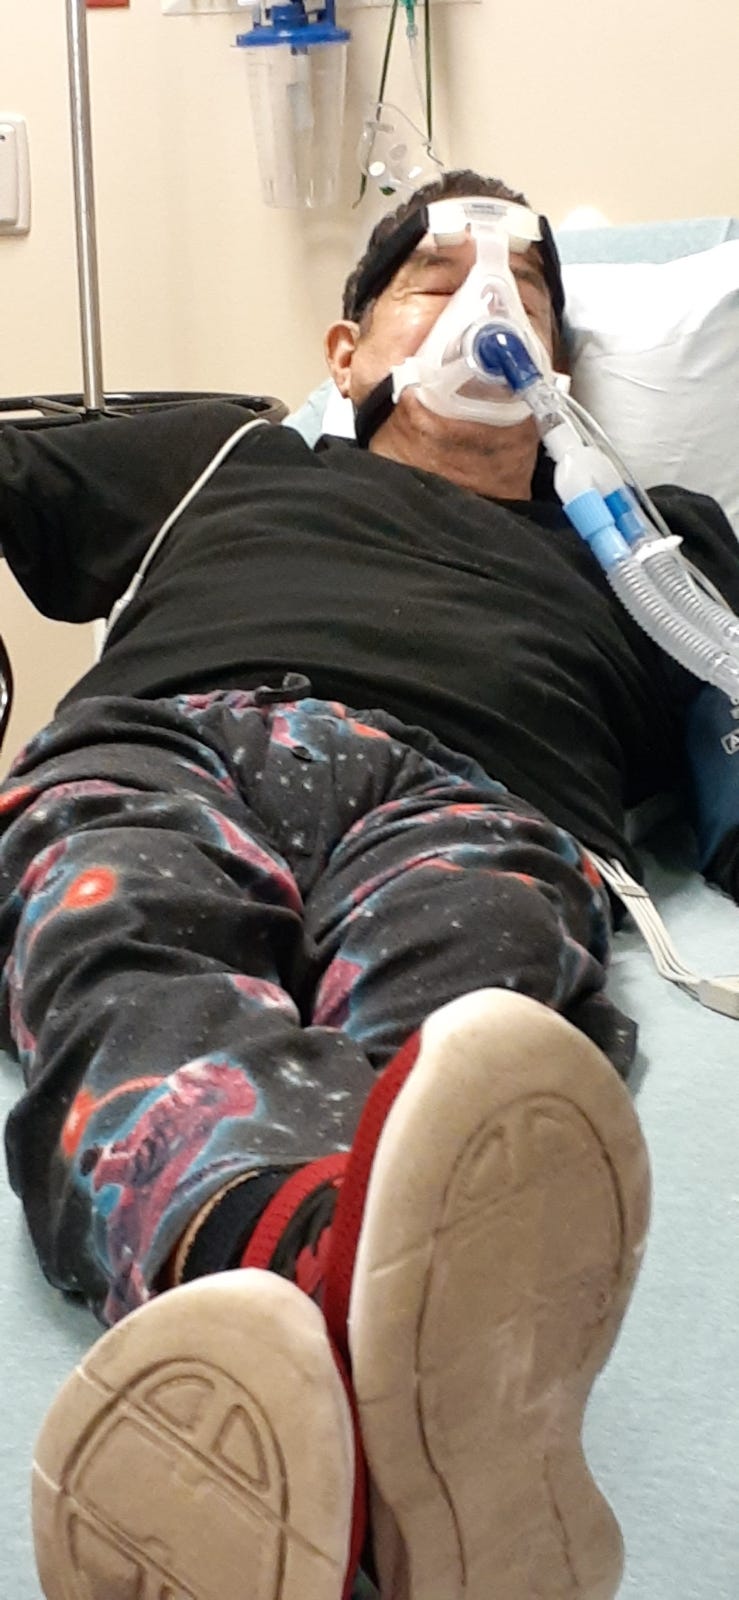 Juan Arizpe receives treatment in the hospital after contracting COVID-19. The 71-year-old would die three days later of the disease.